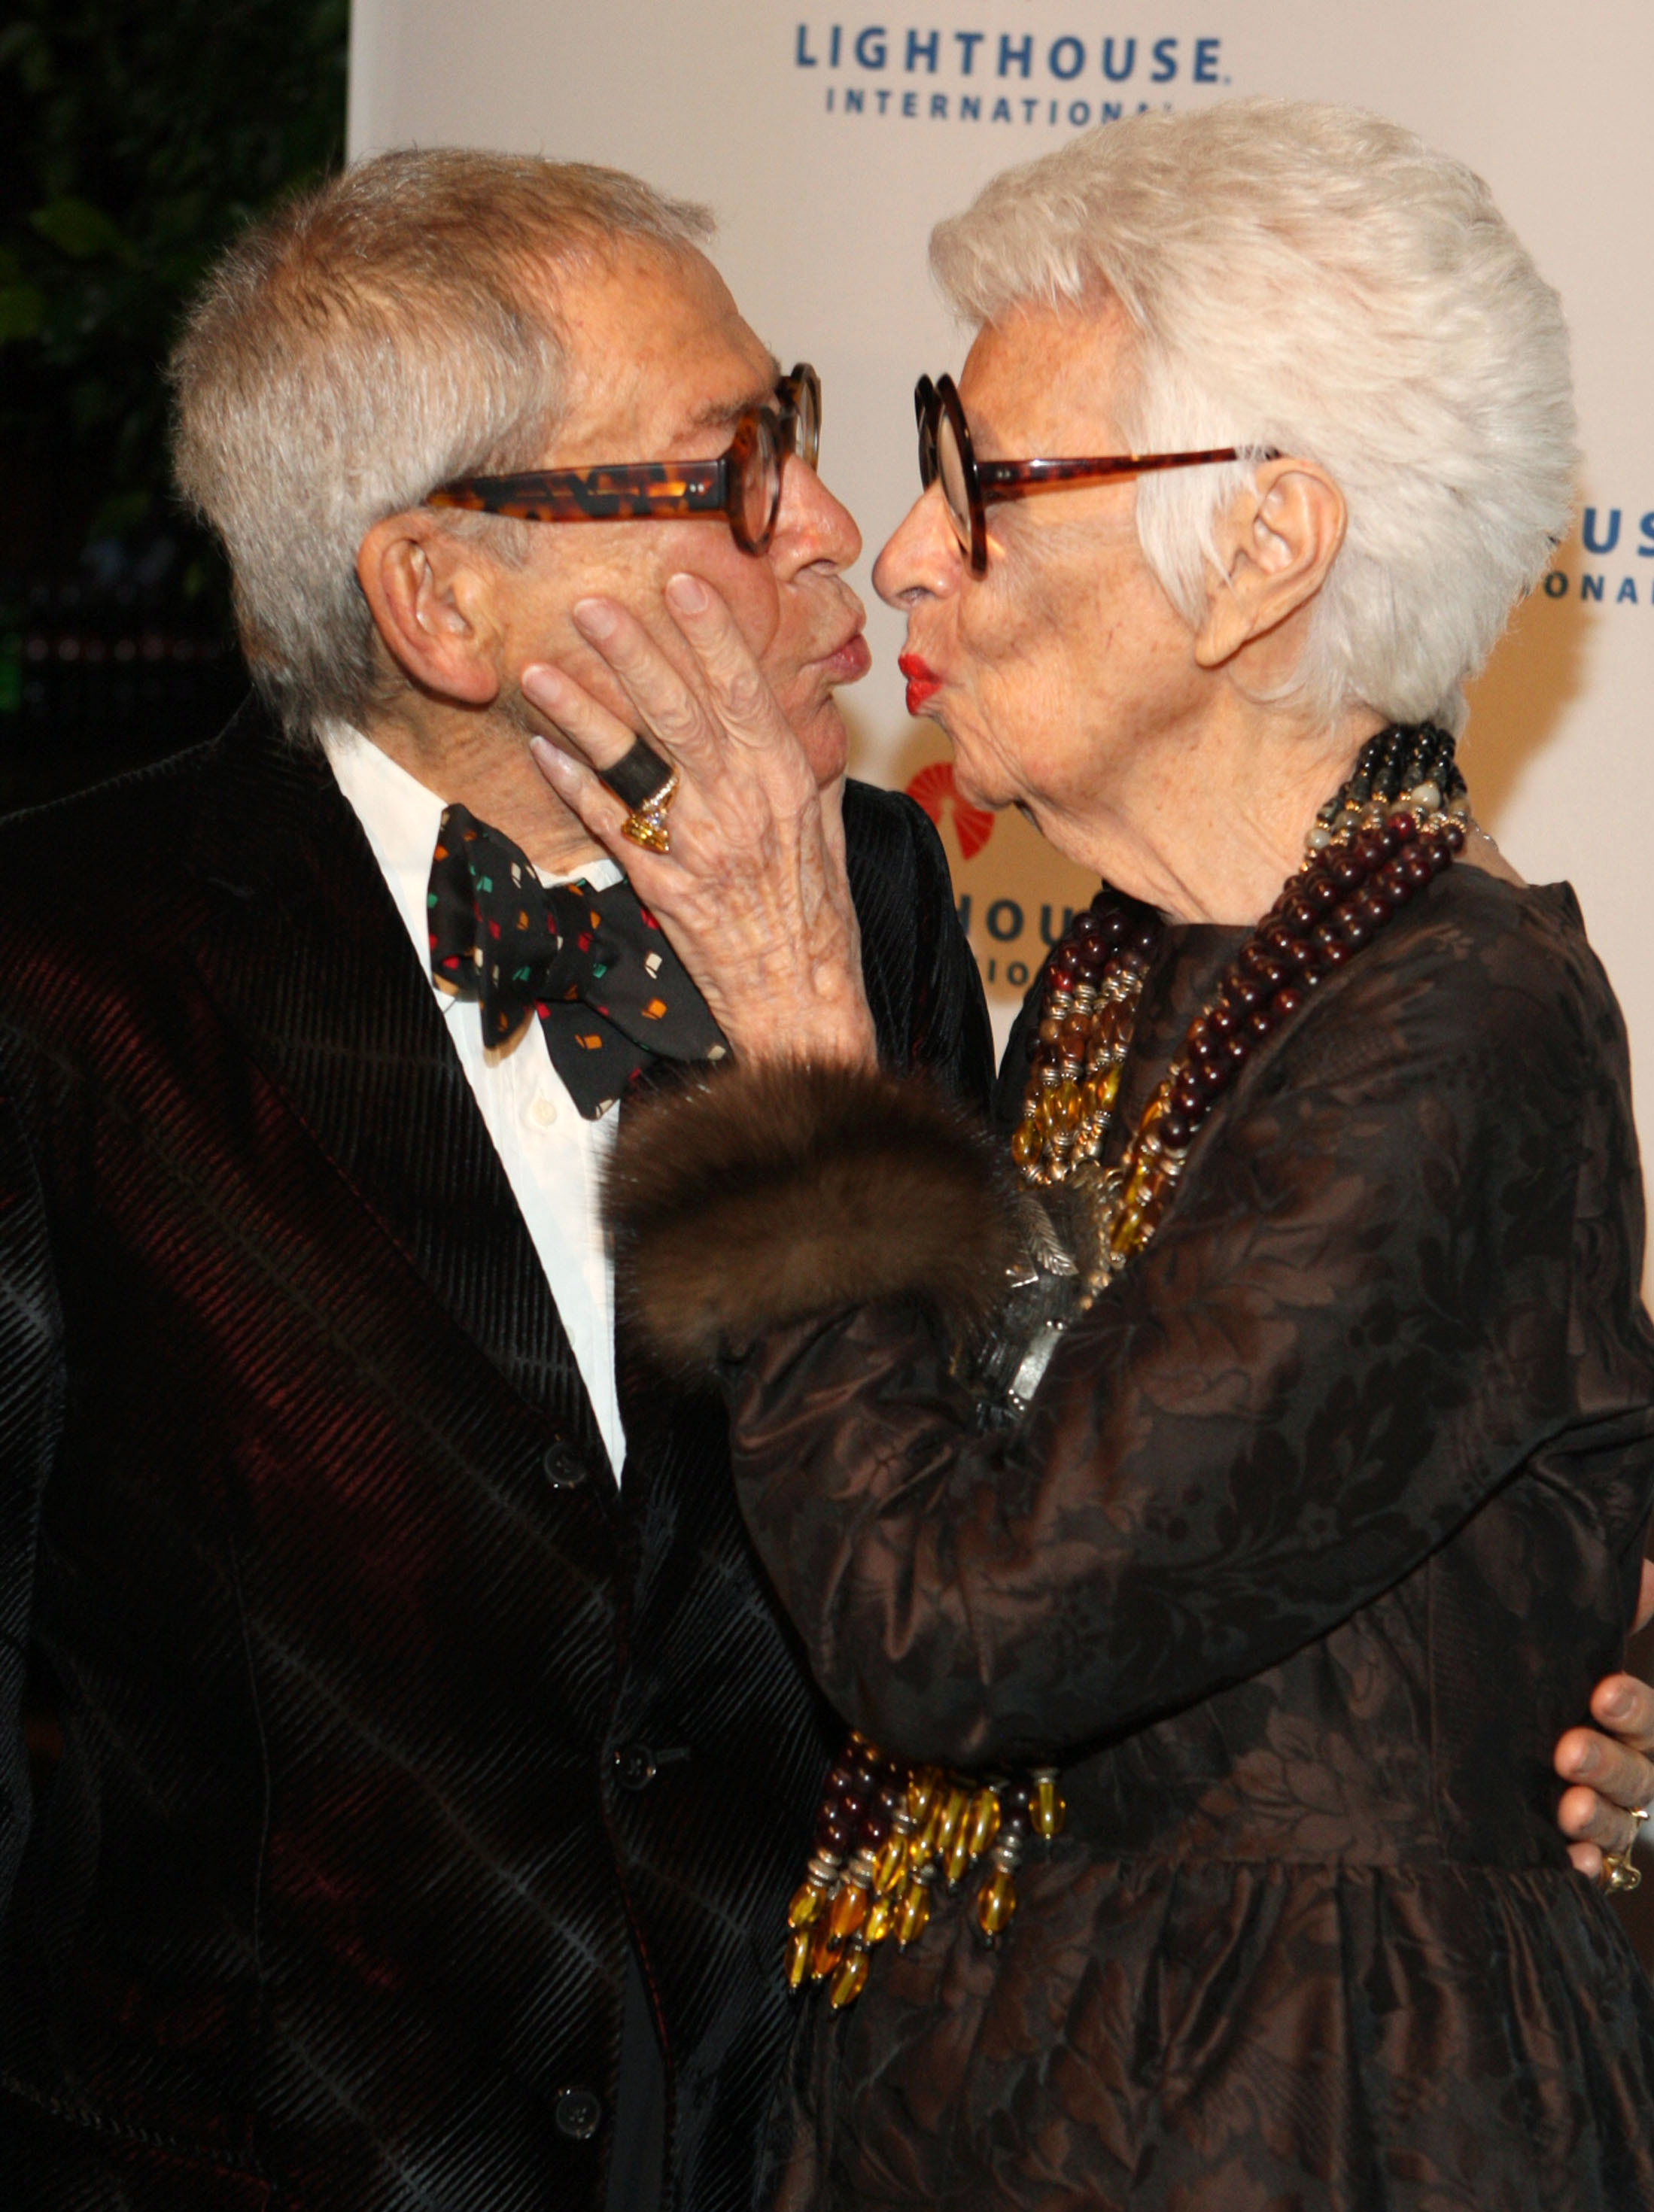 Carl and Iris Apfel at the 2008 Lighthouse International Light Years Gala in New York City | Source: Getty Images